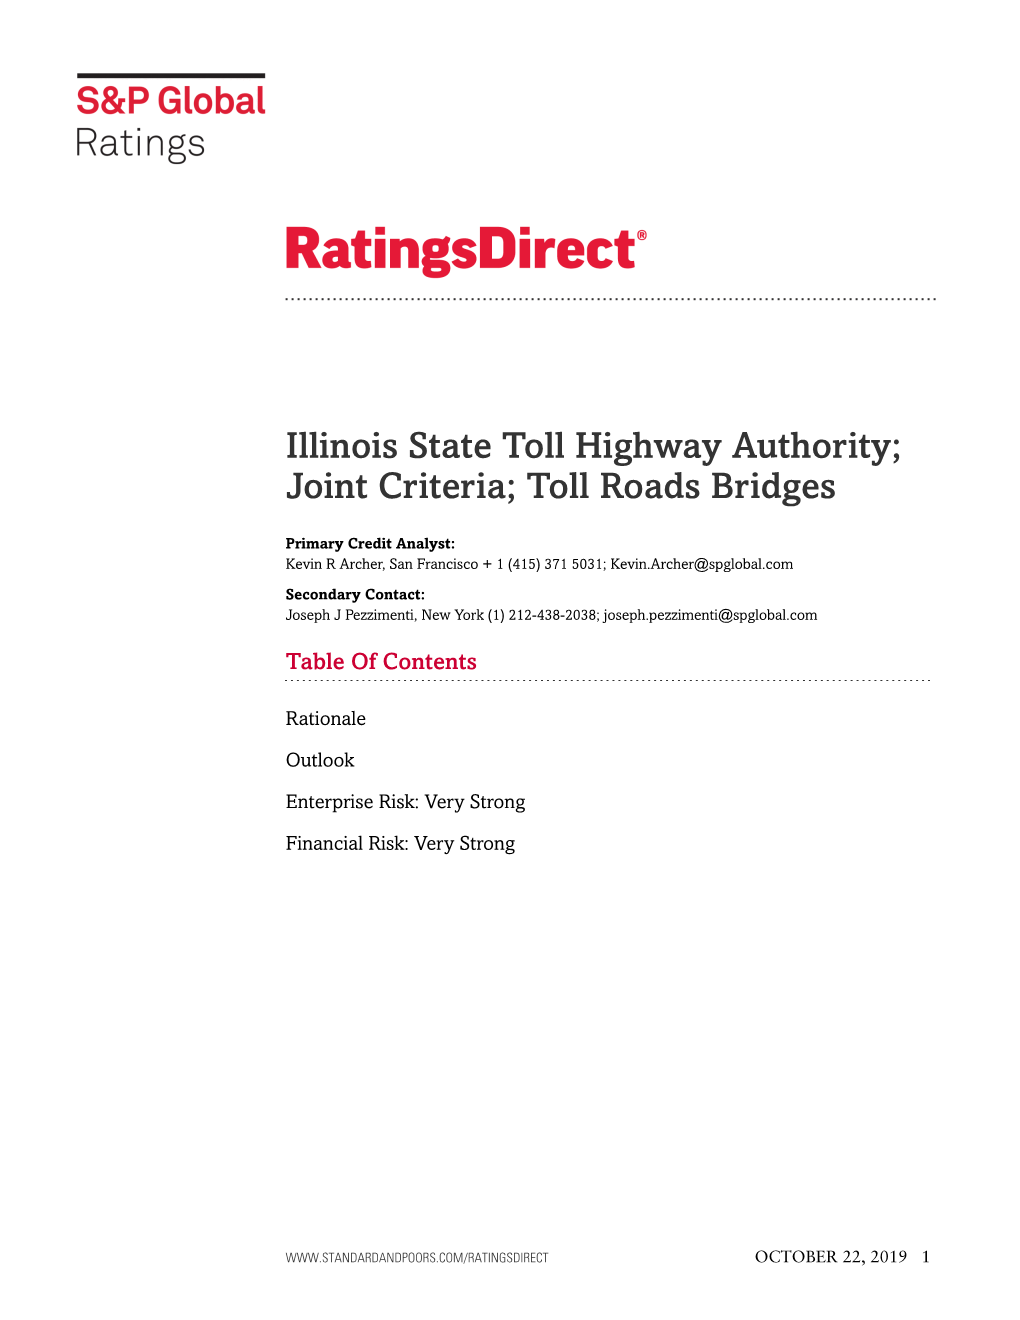 Illinois State Toll Highway Authority; Joint Criteria; Toll Roads Bridges